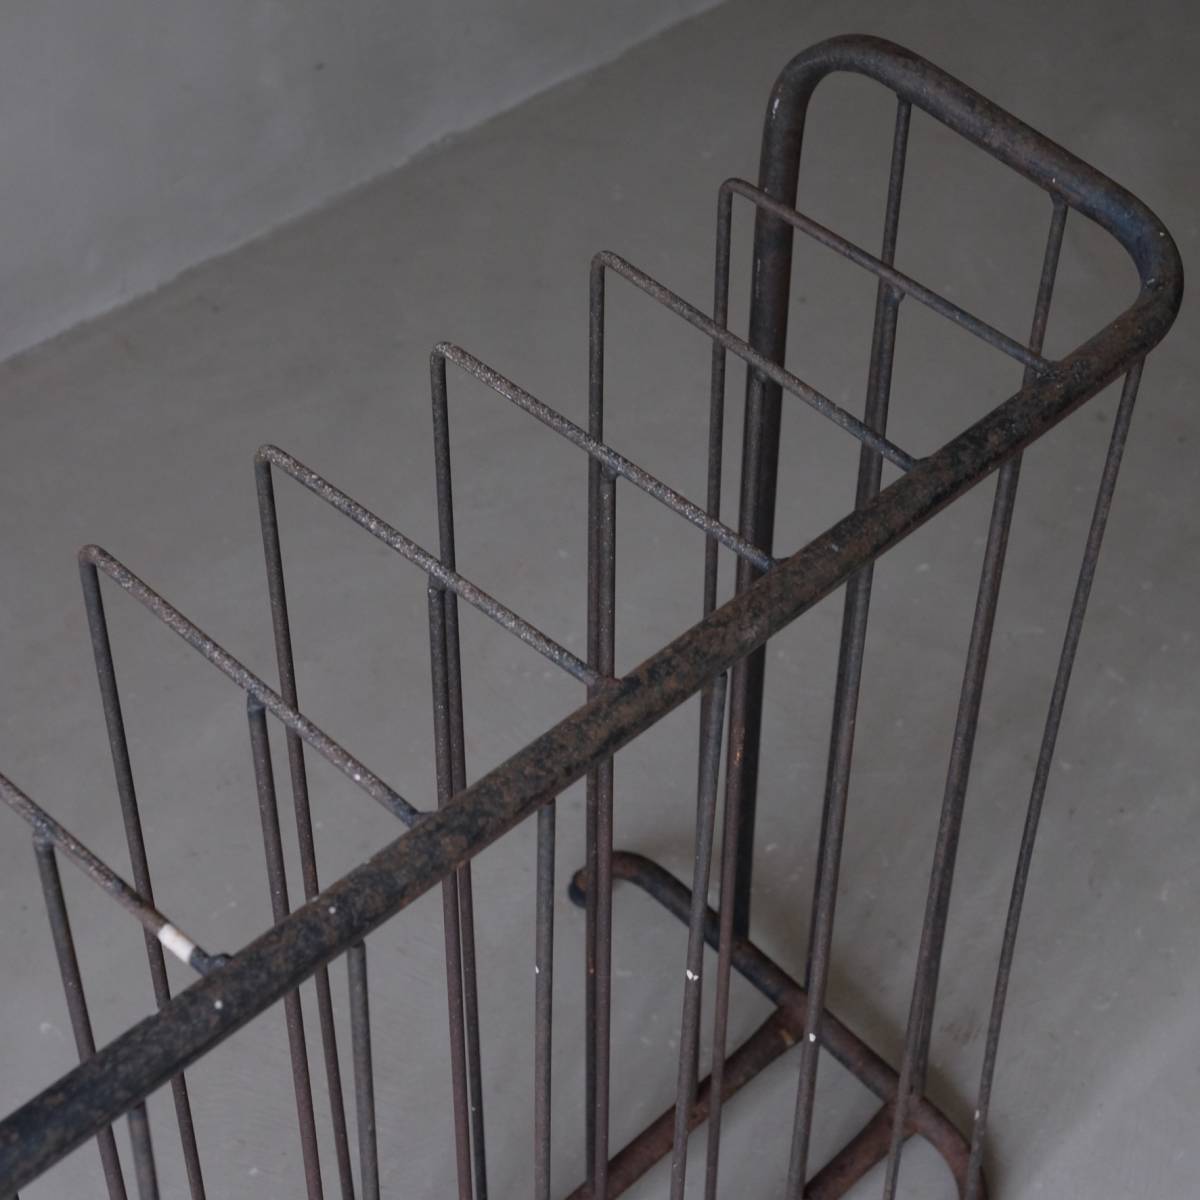 02589 stand type. iron ../ iron stand fence partitioning screen partition umbrella stand 